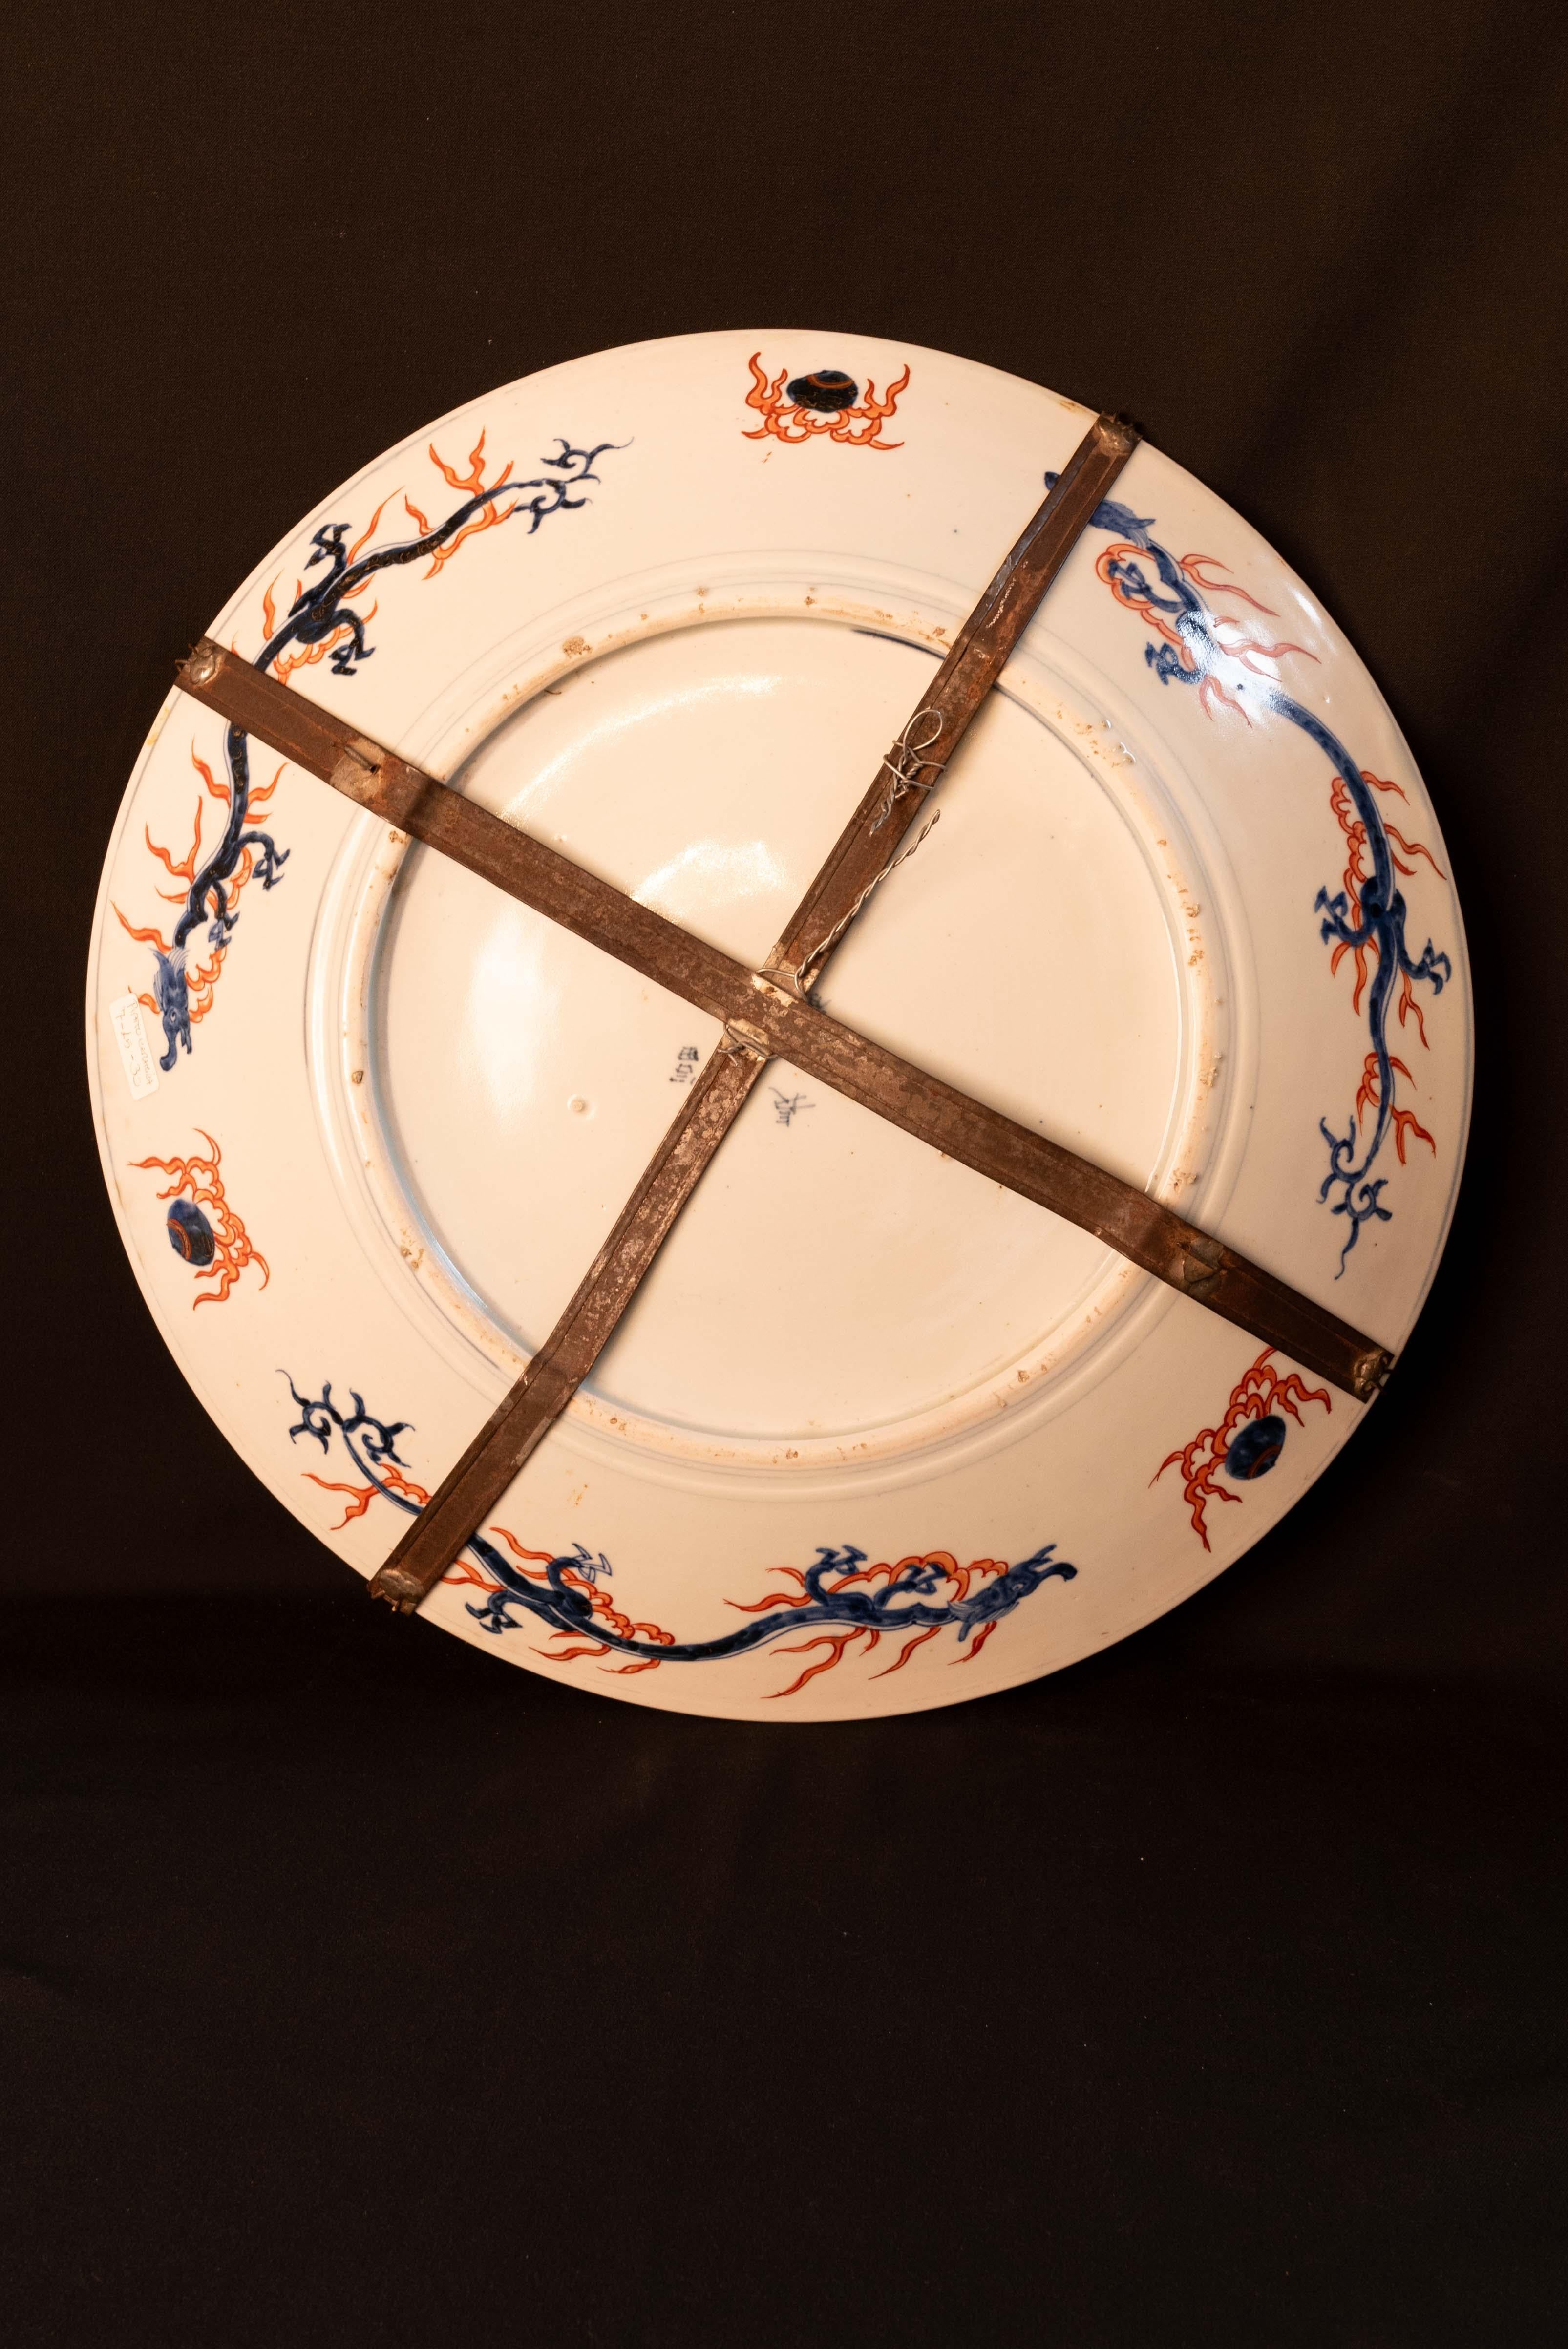 This Japanese Imari plate from Arita dates from the Meiji period (1868-1912)
It was made by Mark Fuki Shoshun (signed on back)
